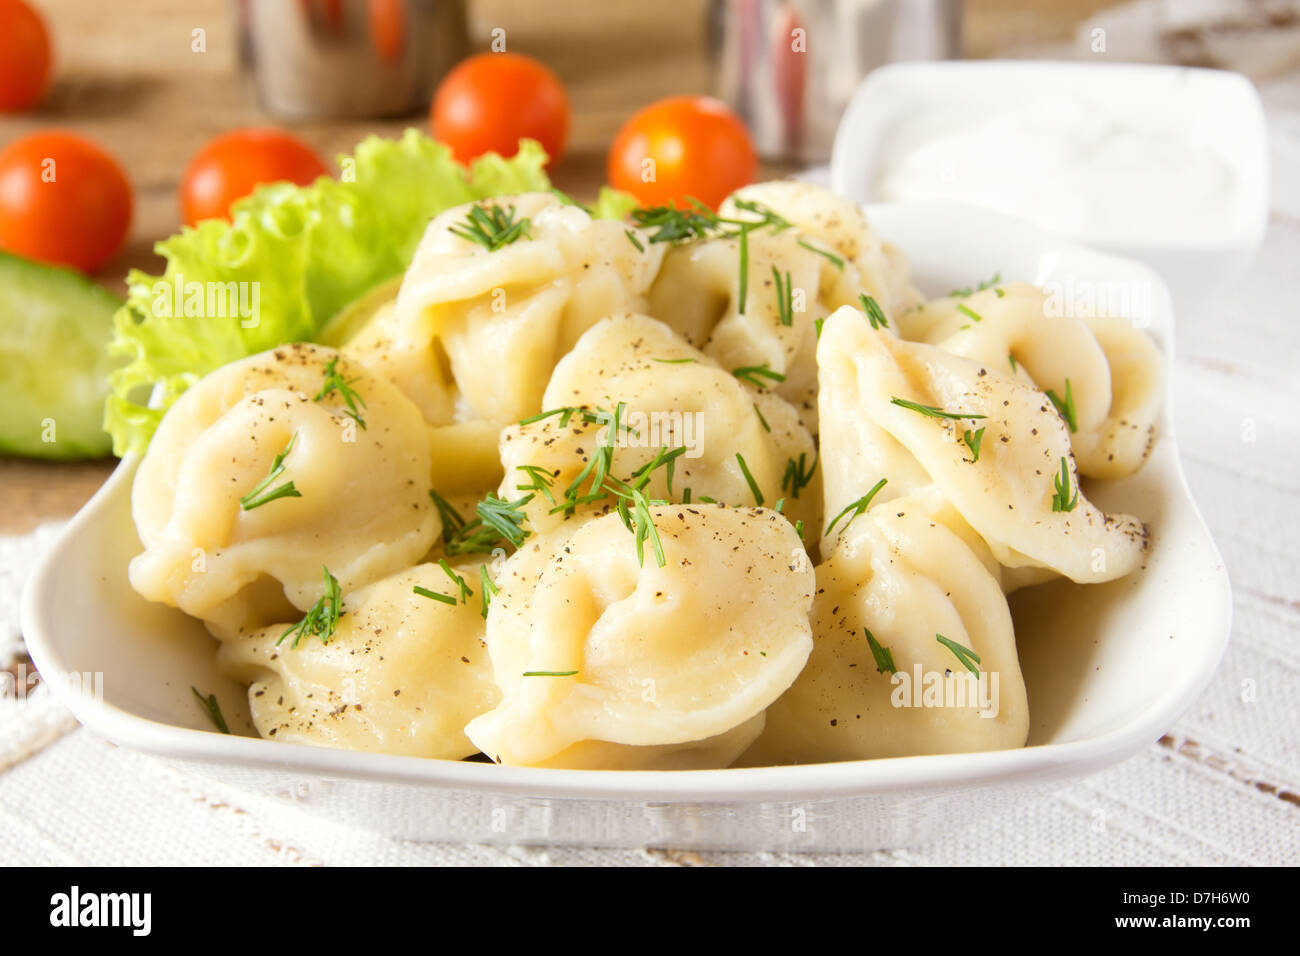 Meat dumplings (russian pelmeni) with pepper, dill (fennel), vegetables and sour cream in bowl close up. Stock Photo